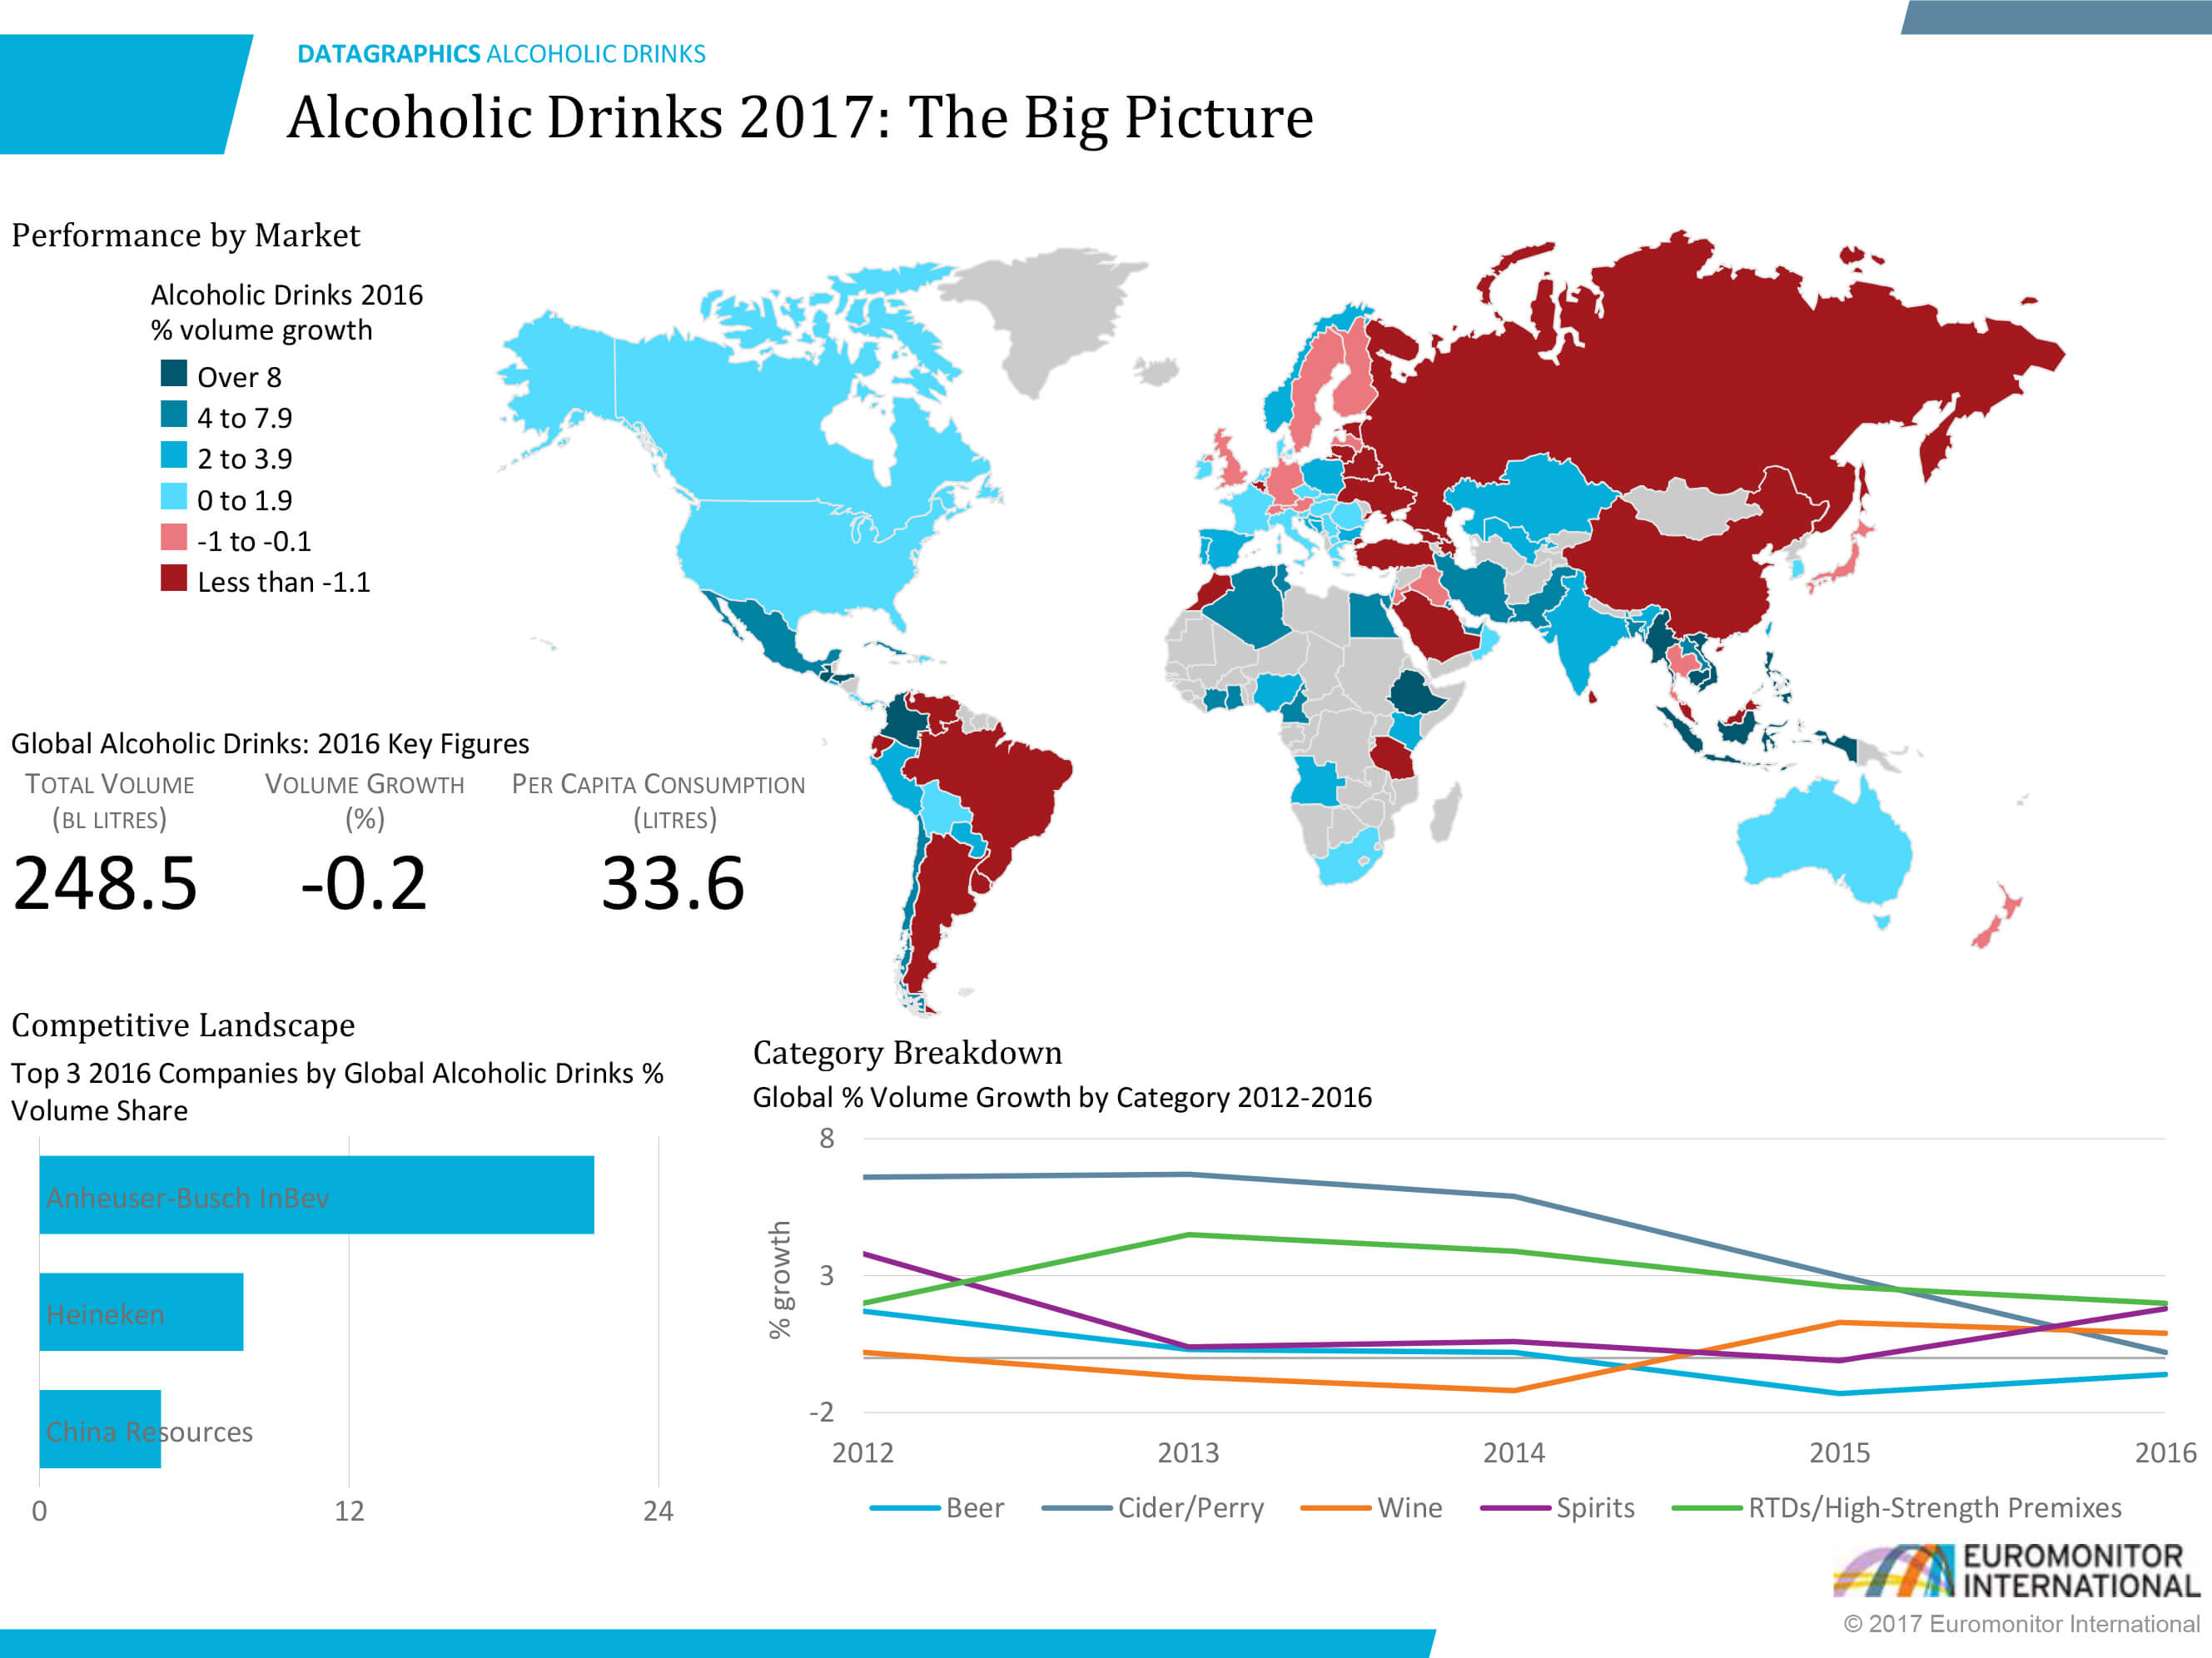 datagraphic map showing alcoholic drinks market performance by country by volume growth. Category breakdown line chart by volume growth over 2012-2016. Competitive landscape top 3 companies by global alcoholic drinks market share by volume Anheuser-Busch InBev, Heineken, China Resources.